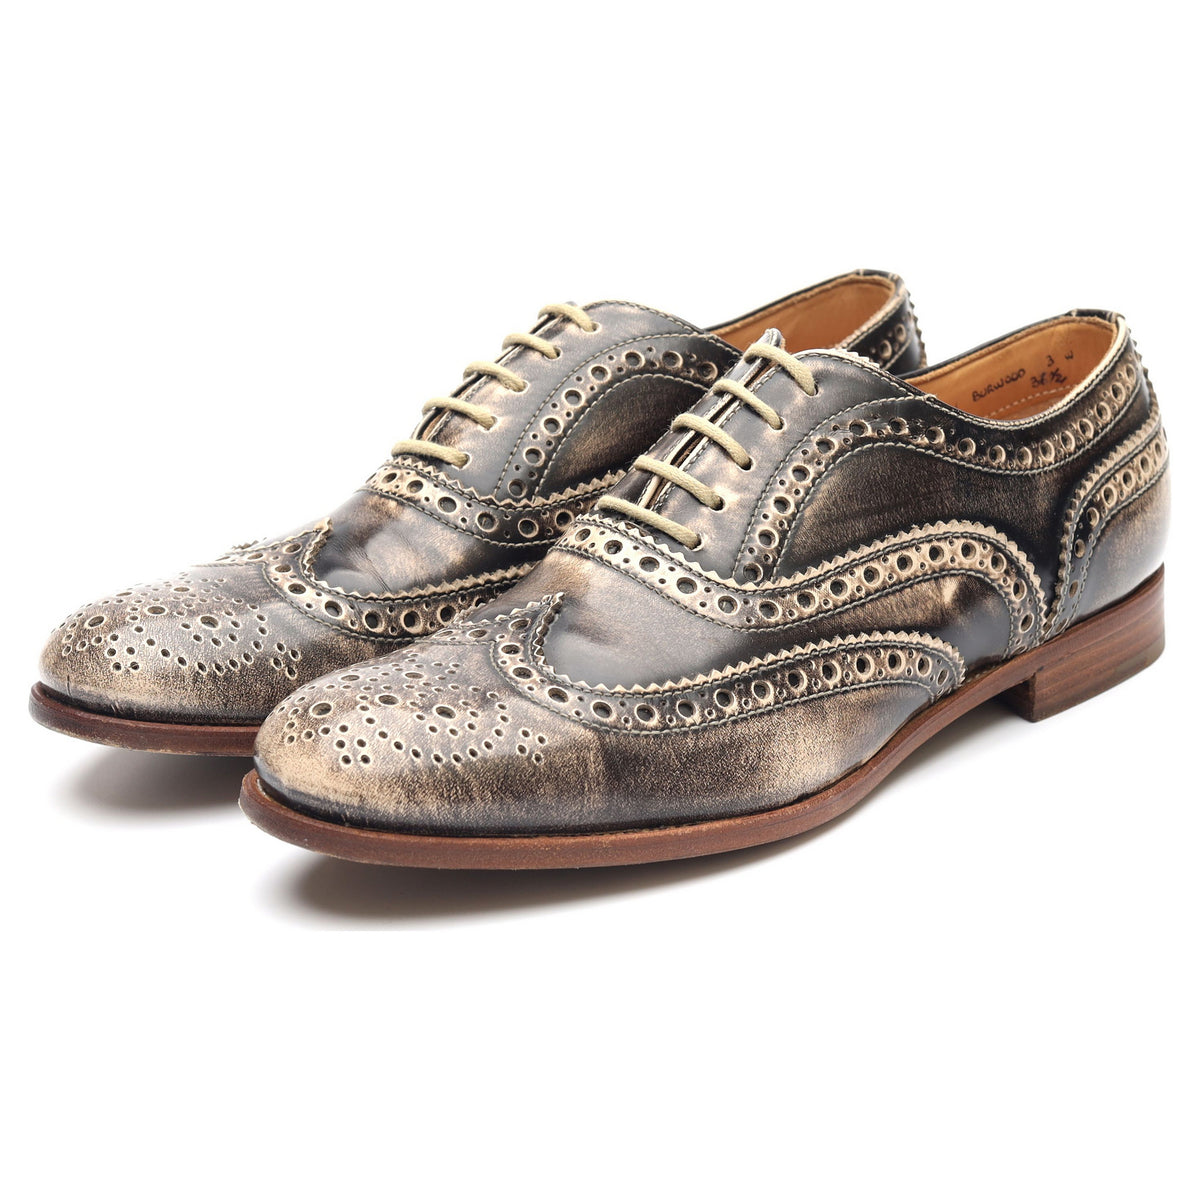 CLASSIC COLLECTION Burwood wg | Brogue shoes, Crazy shoes, Shoes oxfords